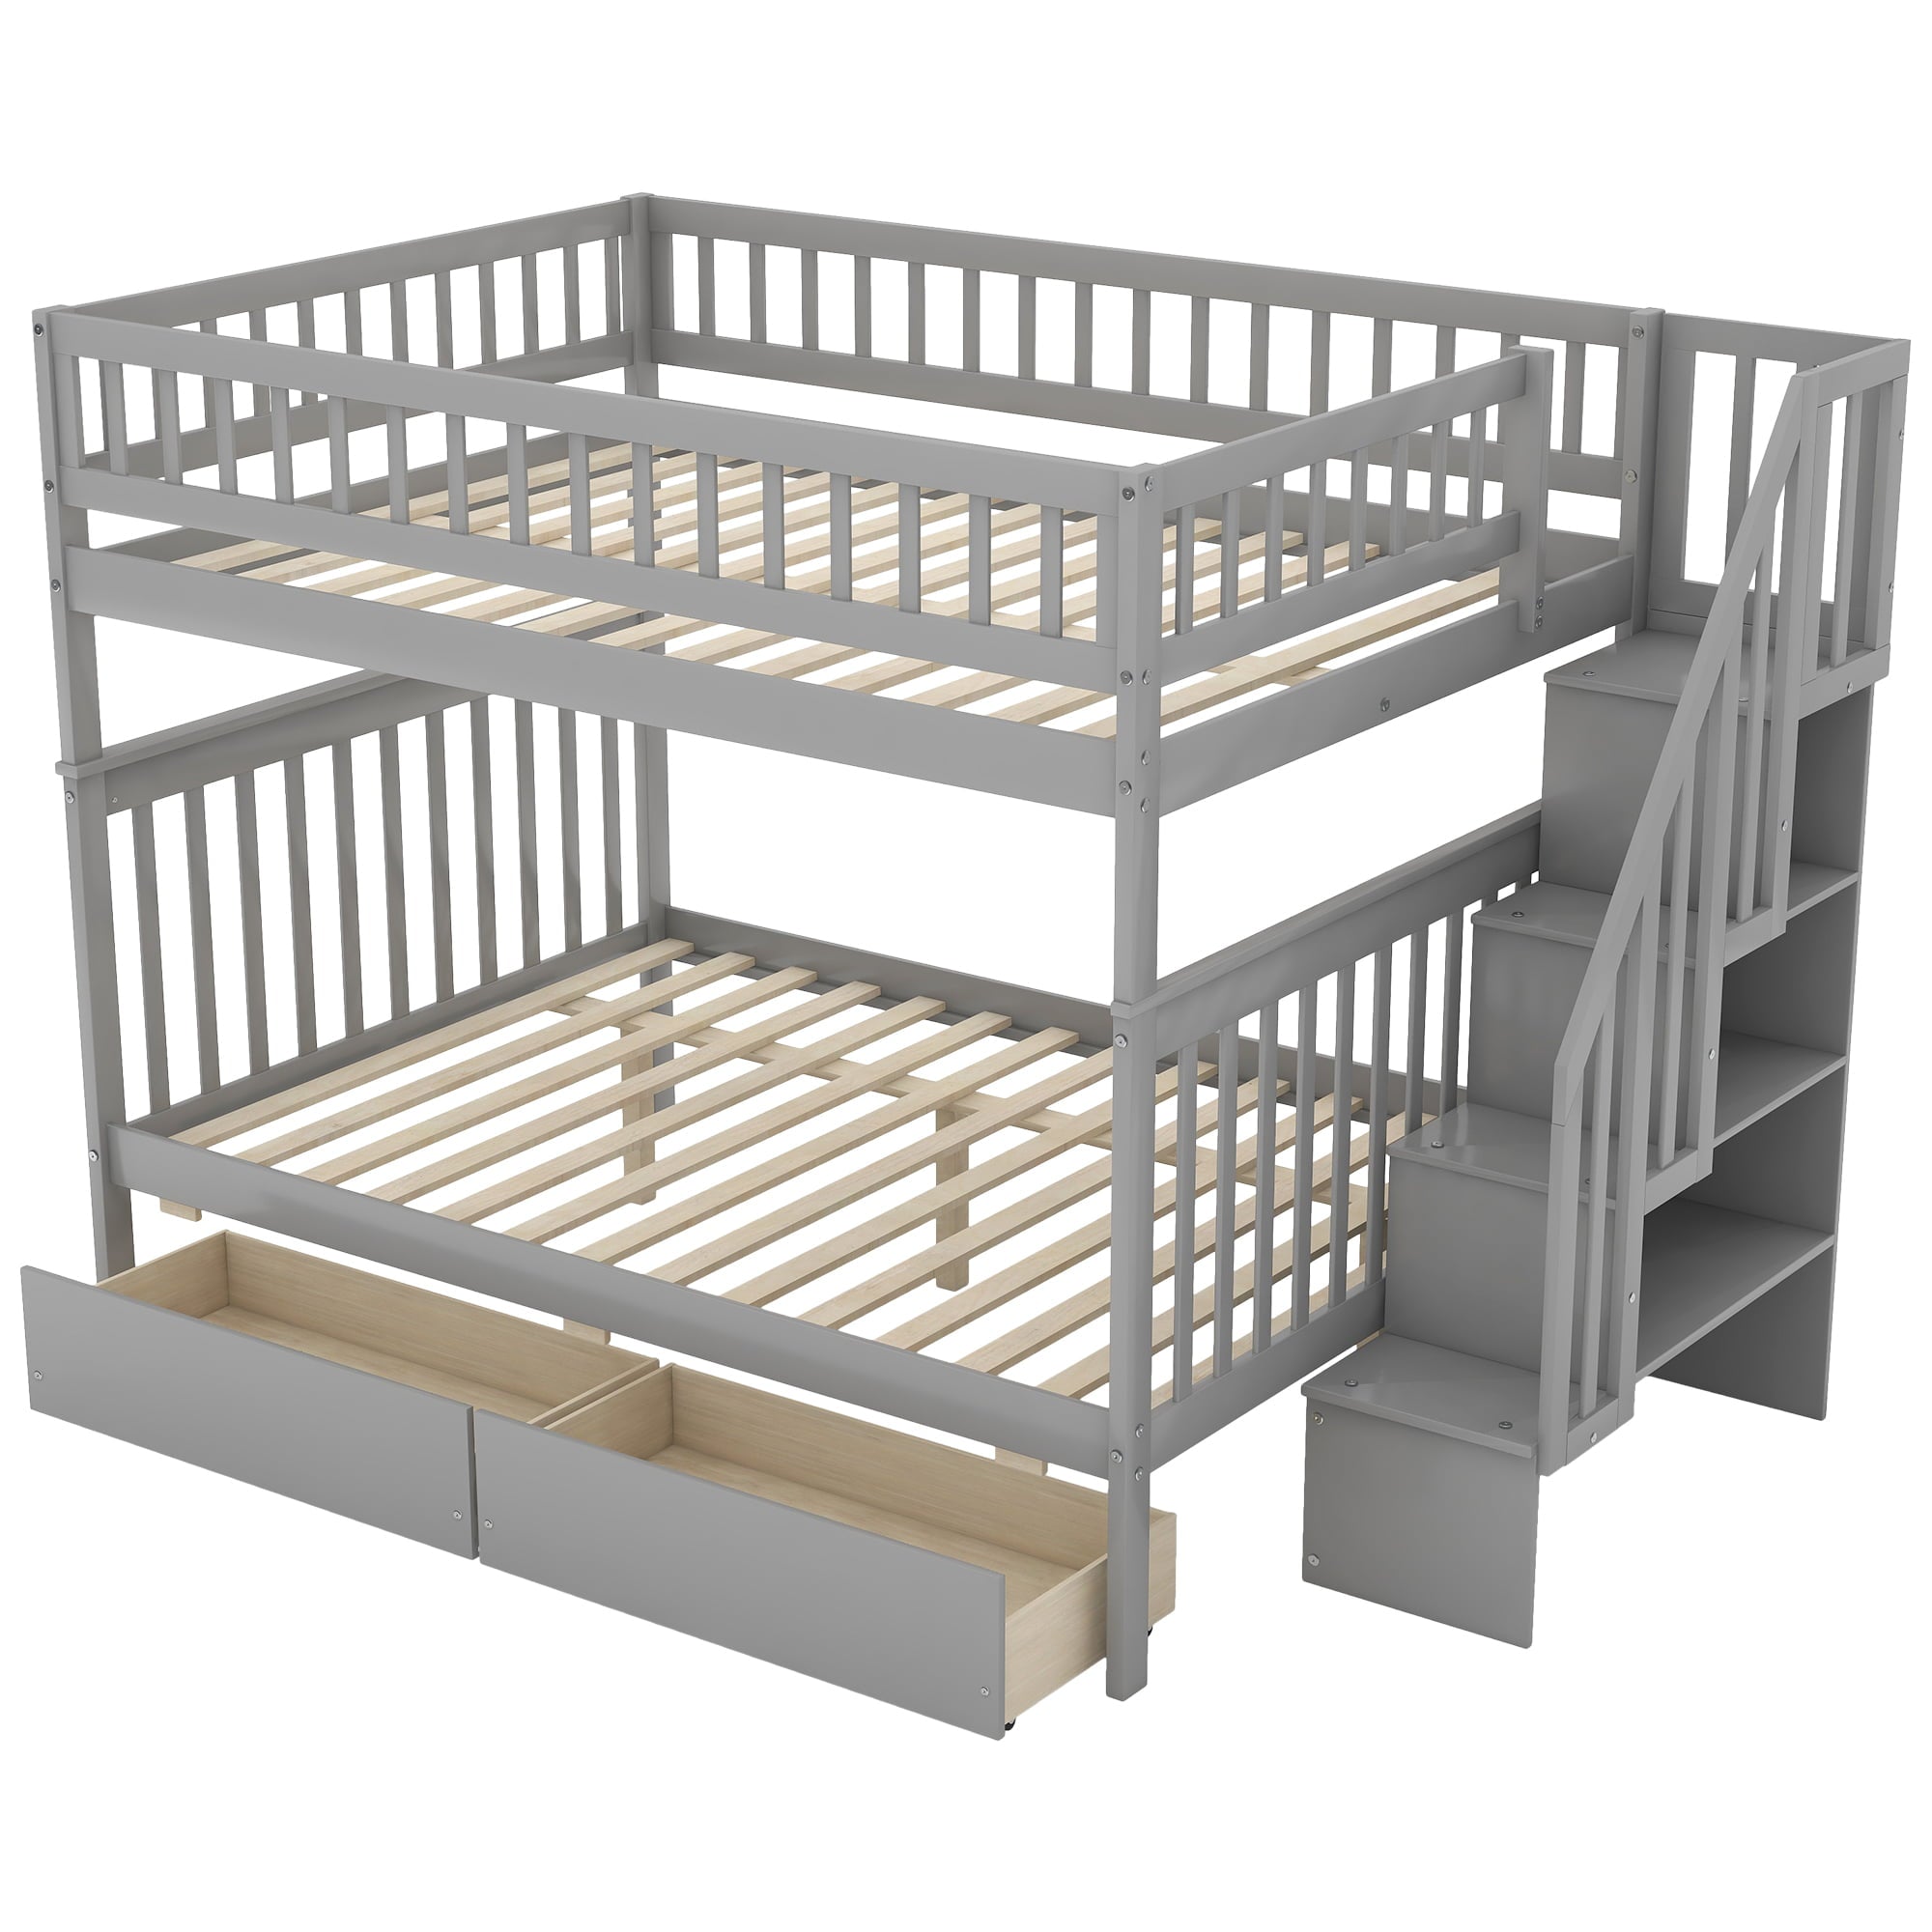 Euroco Full over Full Bunk Bed with Storage Shelves and 2 Under Storage Drawers for Kids Room